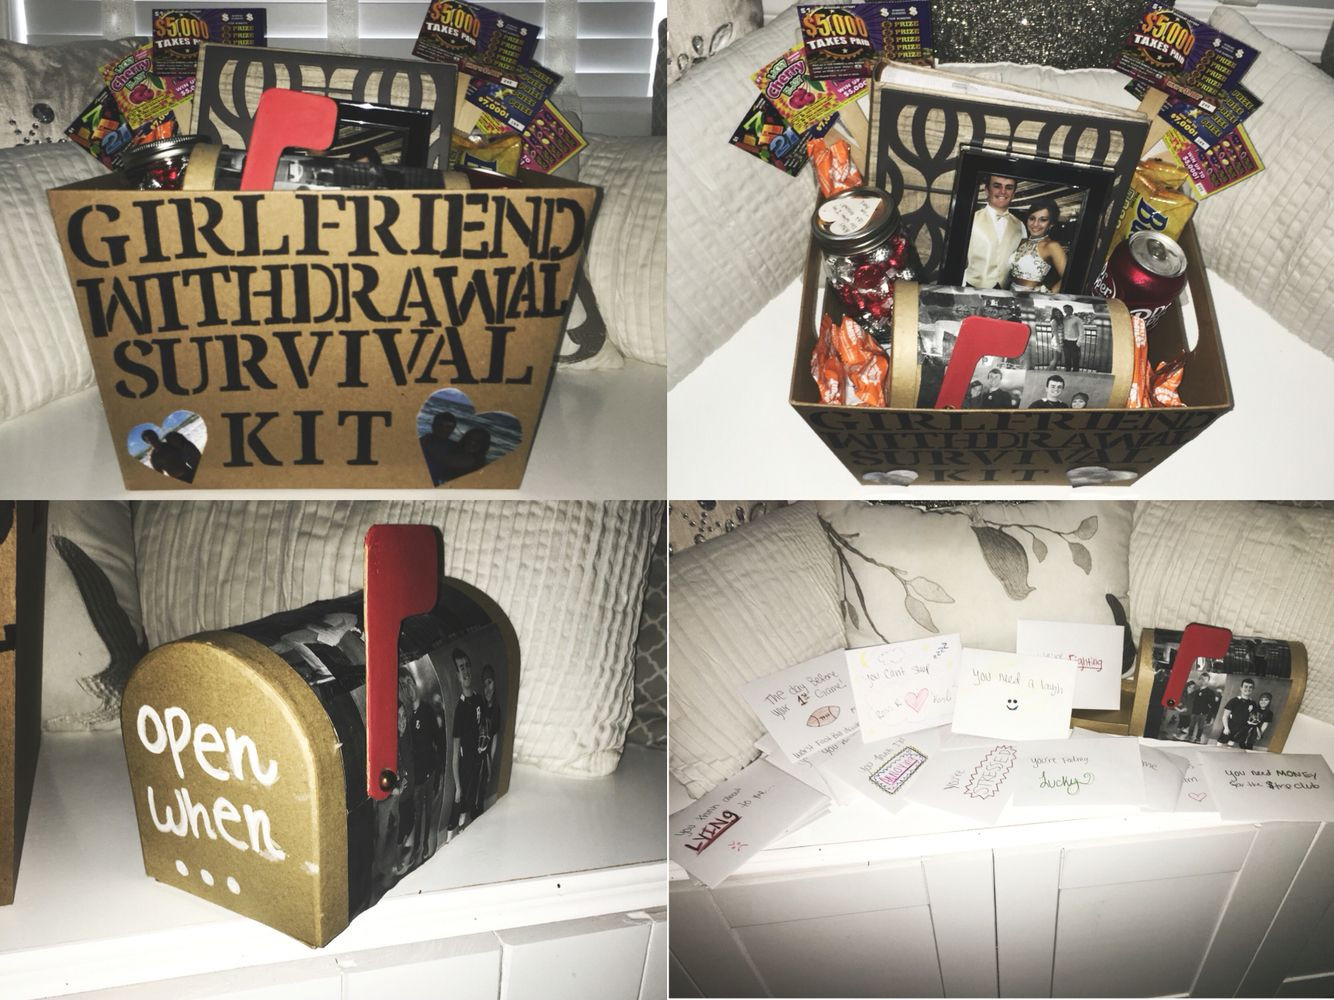 Boyfriend Leaving For College Gift Ideas
 Girlfriend withdrawal survival kit and open when letters